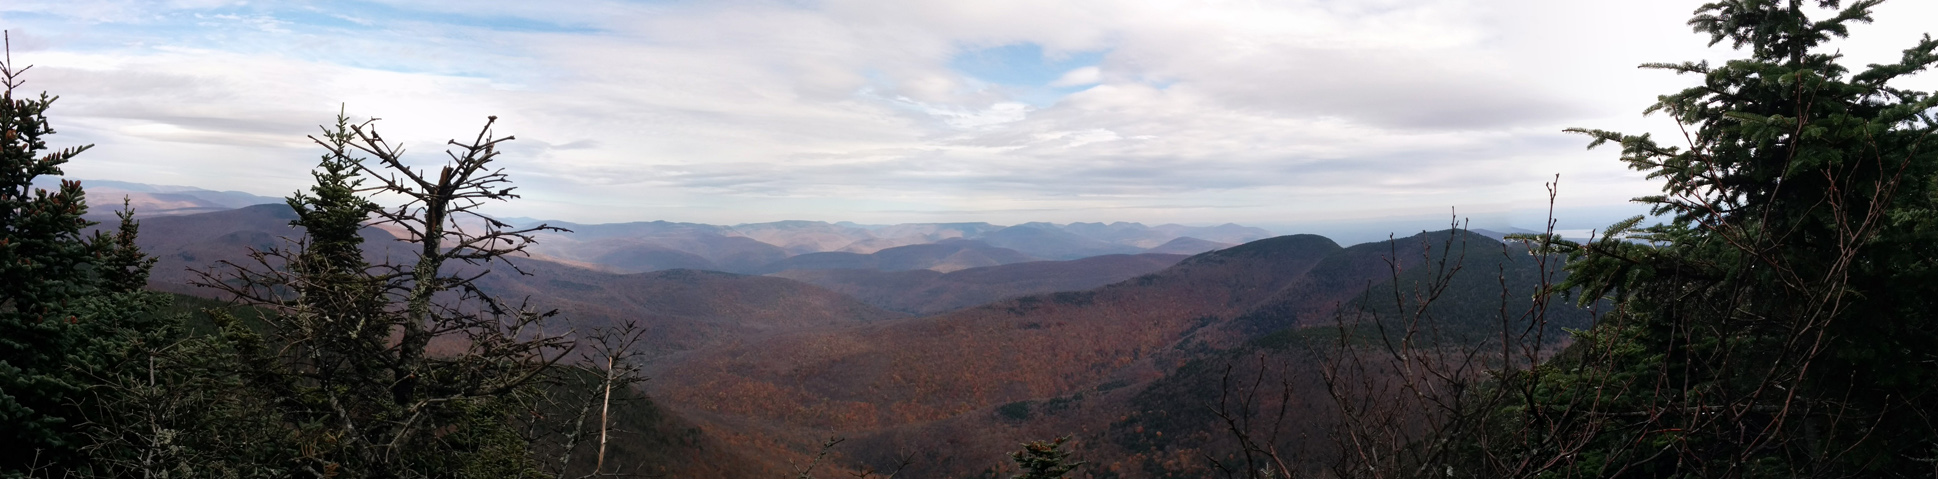 Panorama of Devils Path from Slide Mountain. Photo by Daniel Chazin.